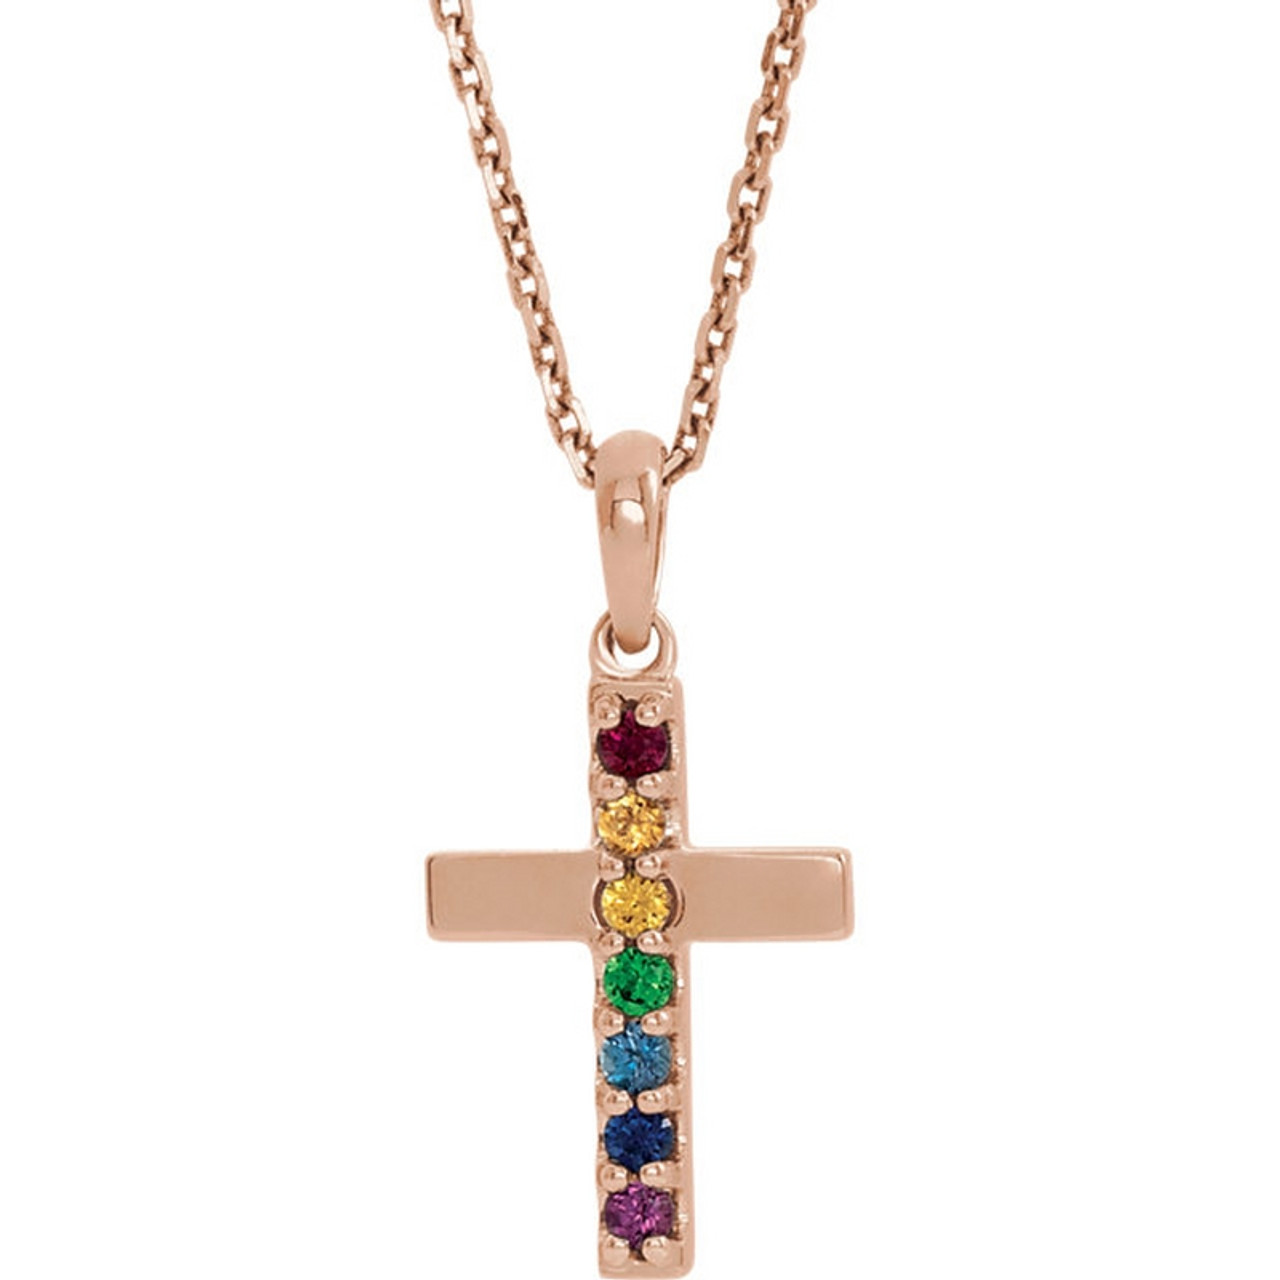 Gem Stone King 18K Rose Gold Plated Silver Cross Pendant Necklace with Blue  Sapphire Dust in Glass - Birthstone Gemstone on 18 inch Silver Chain (10.00  Cttw, Length: 1.5 inch) - Walmart.com